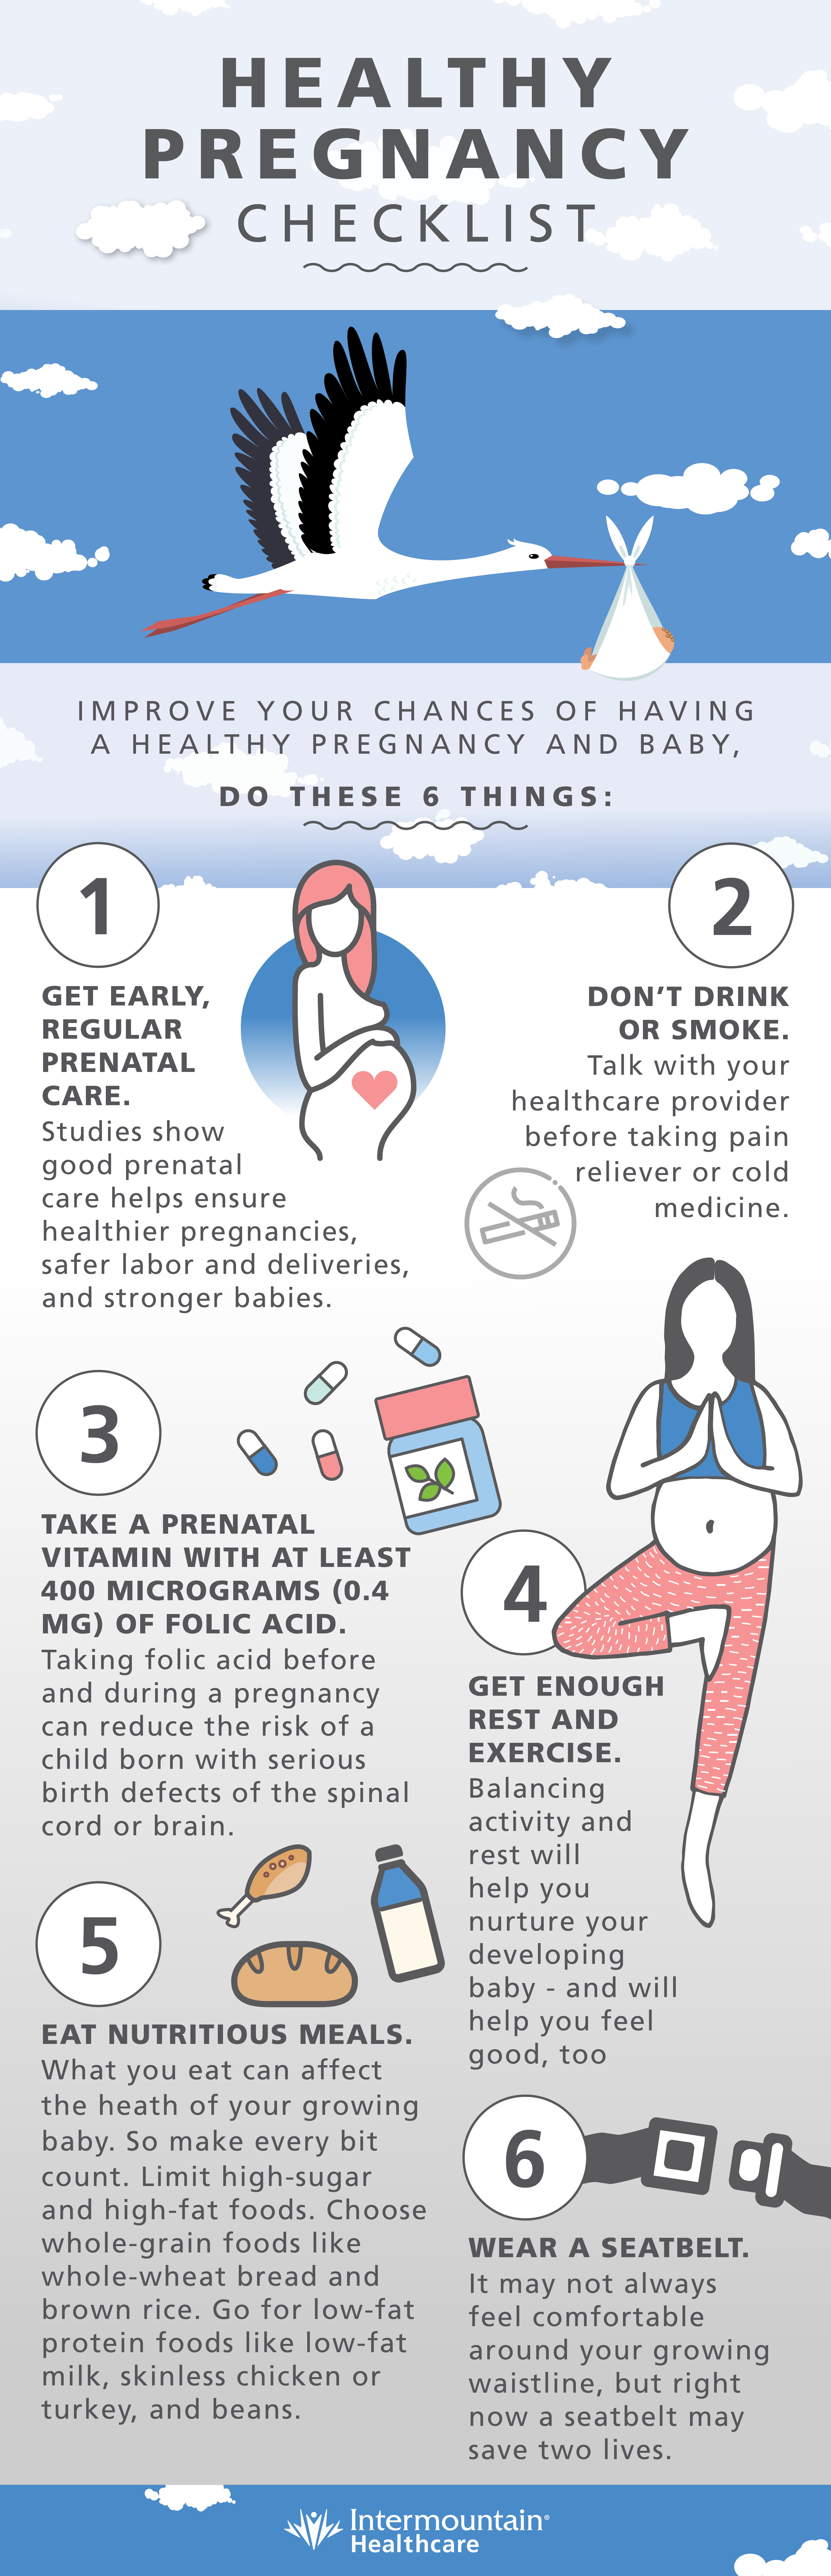 Minority Health on X: #DYK @PtSafetyCouncil developed a one-page  infographic that visually represents 15 urgent maternal warning signs?  Intended for pregnant people or people who were pregnant within the last  year, the